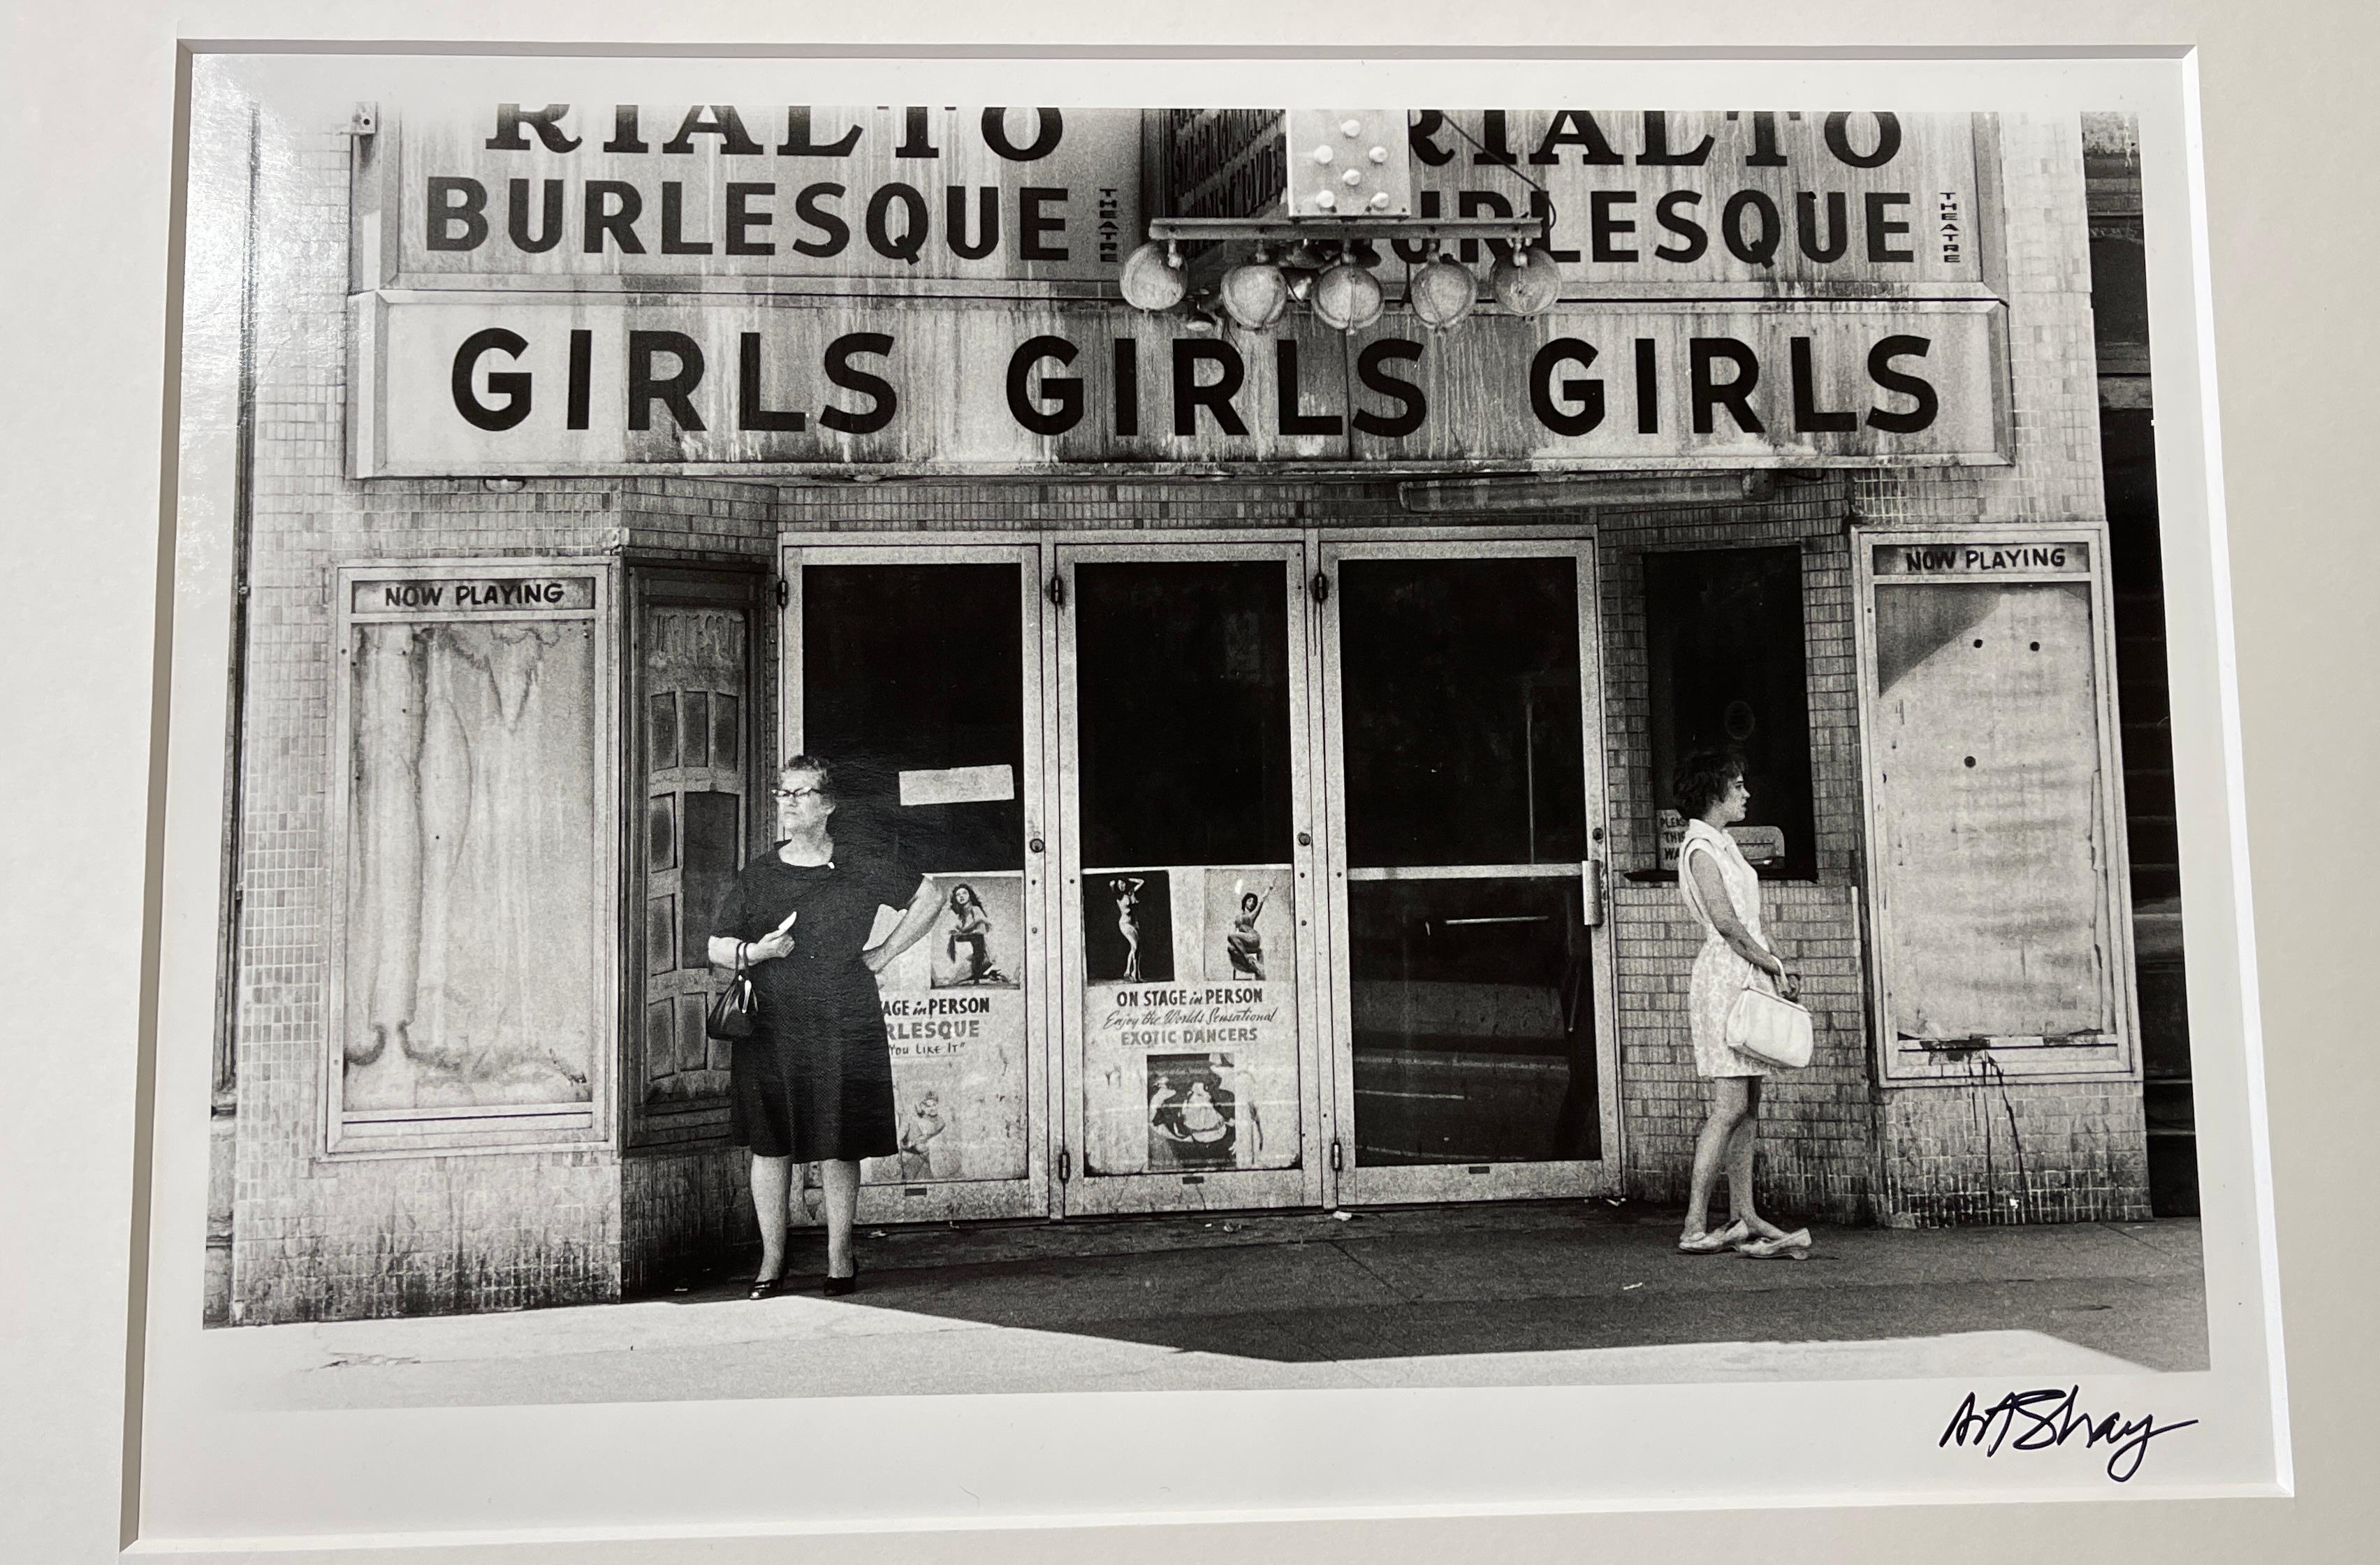 Girls Girls Girls, State St. Strip Joint Near Death, Chicago, 1966 - Gray Black and White Photograph by Art Shay